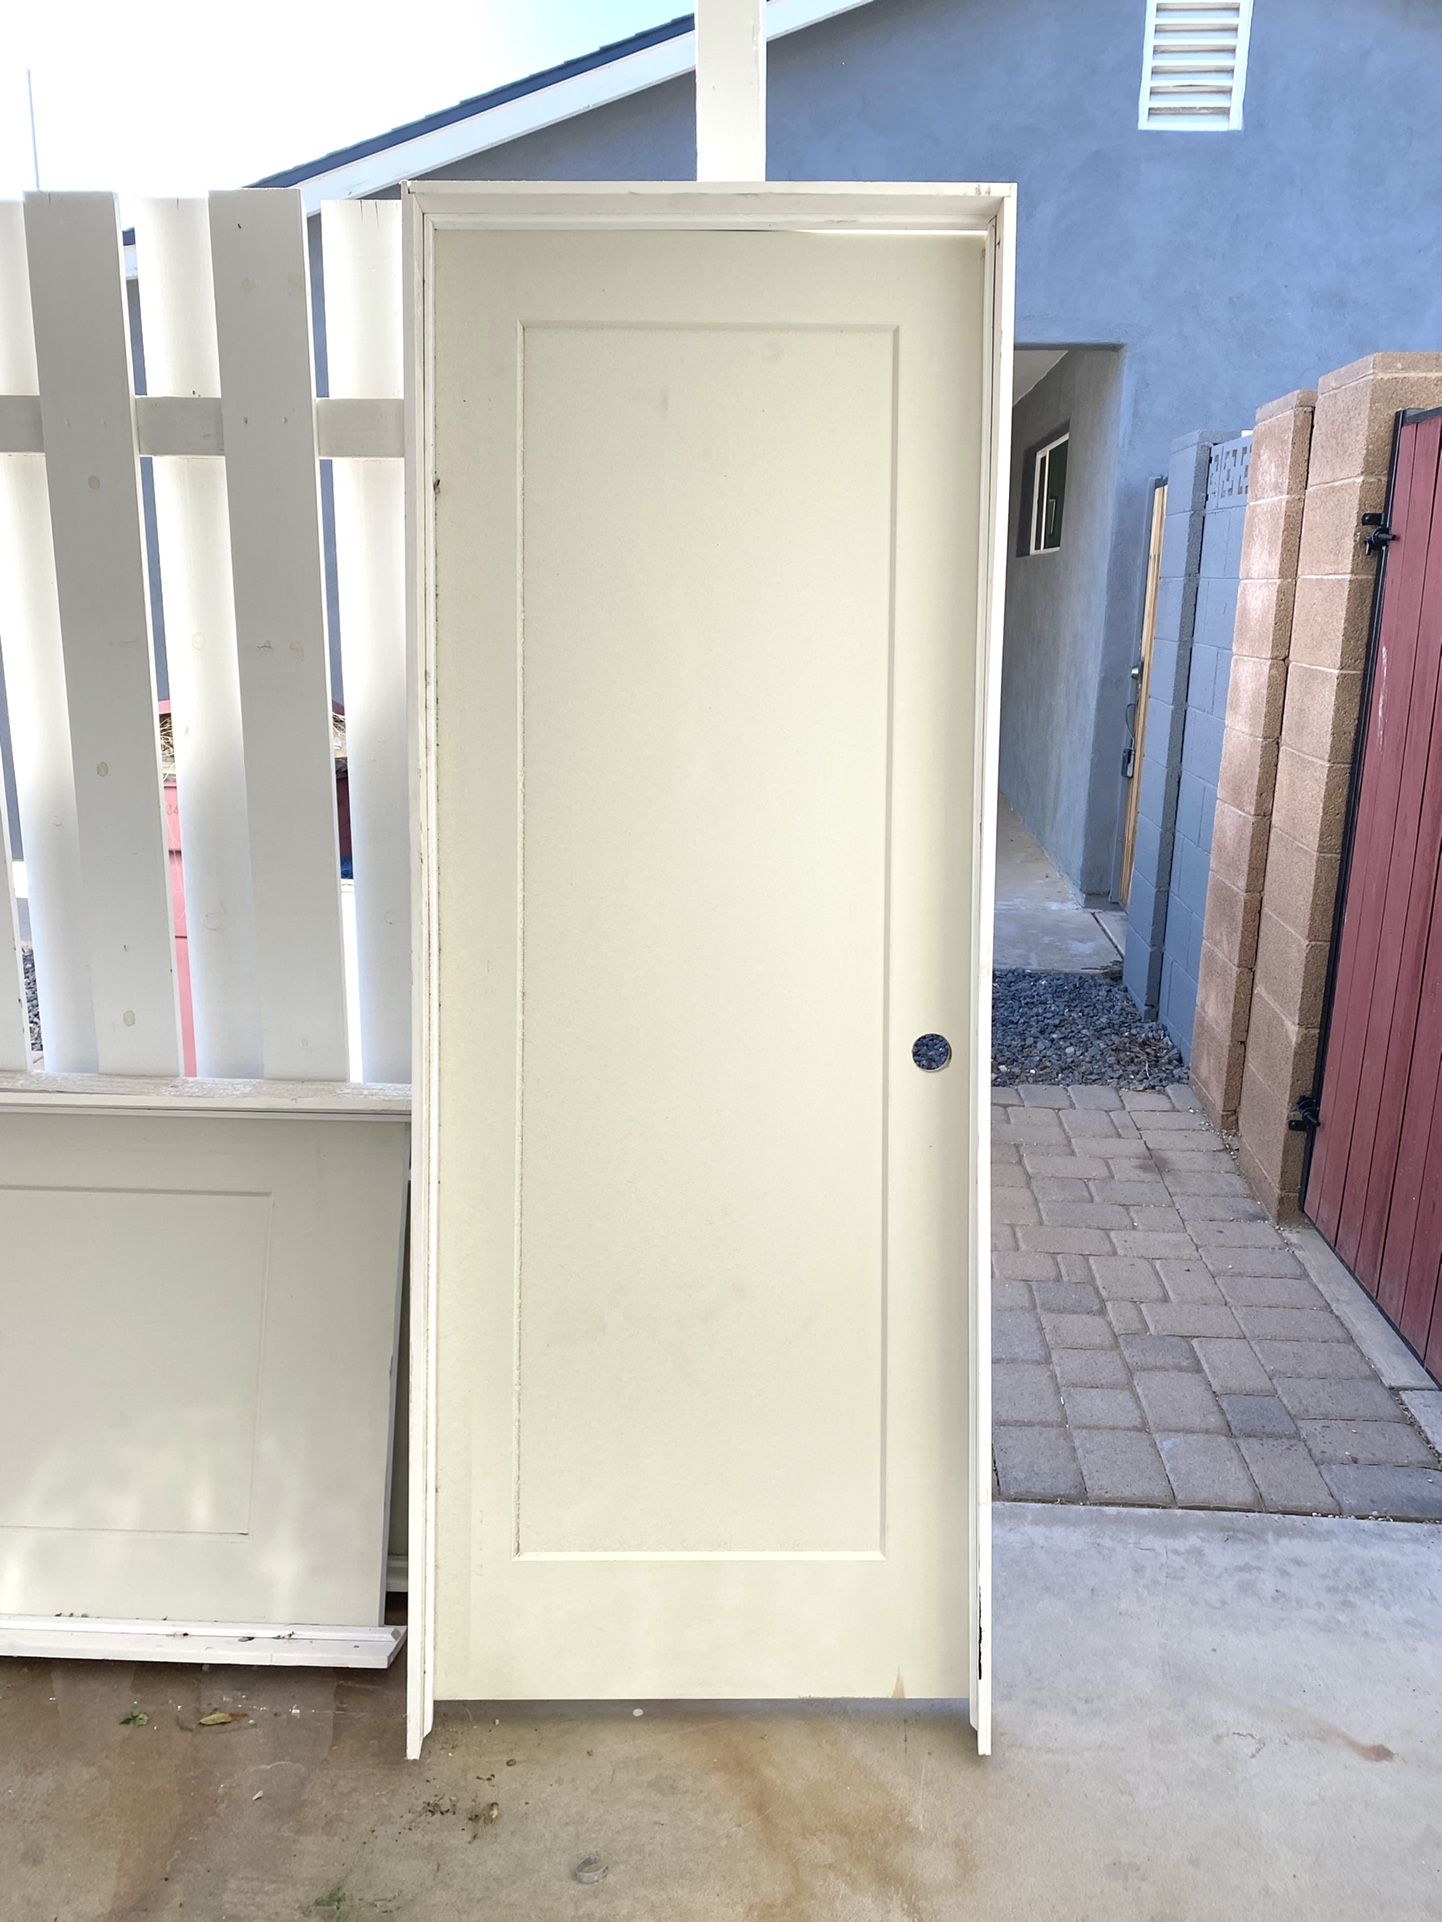 4 Pre Hung Madison Interior Doors Available for Only $50 each